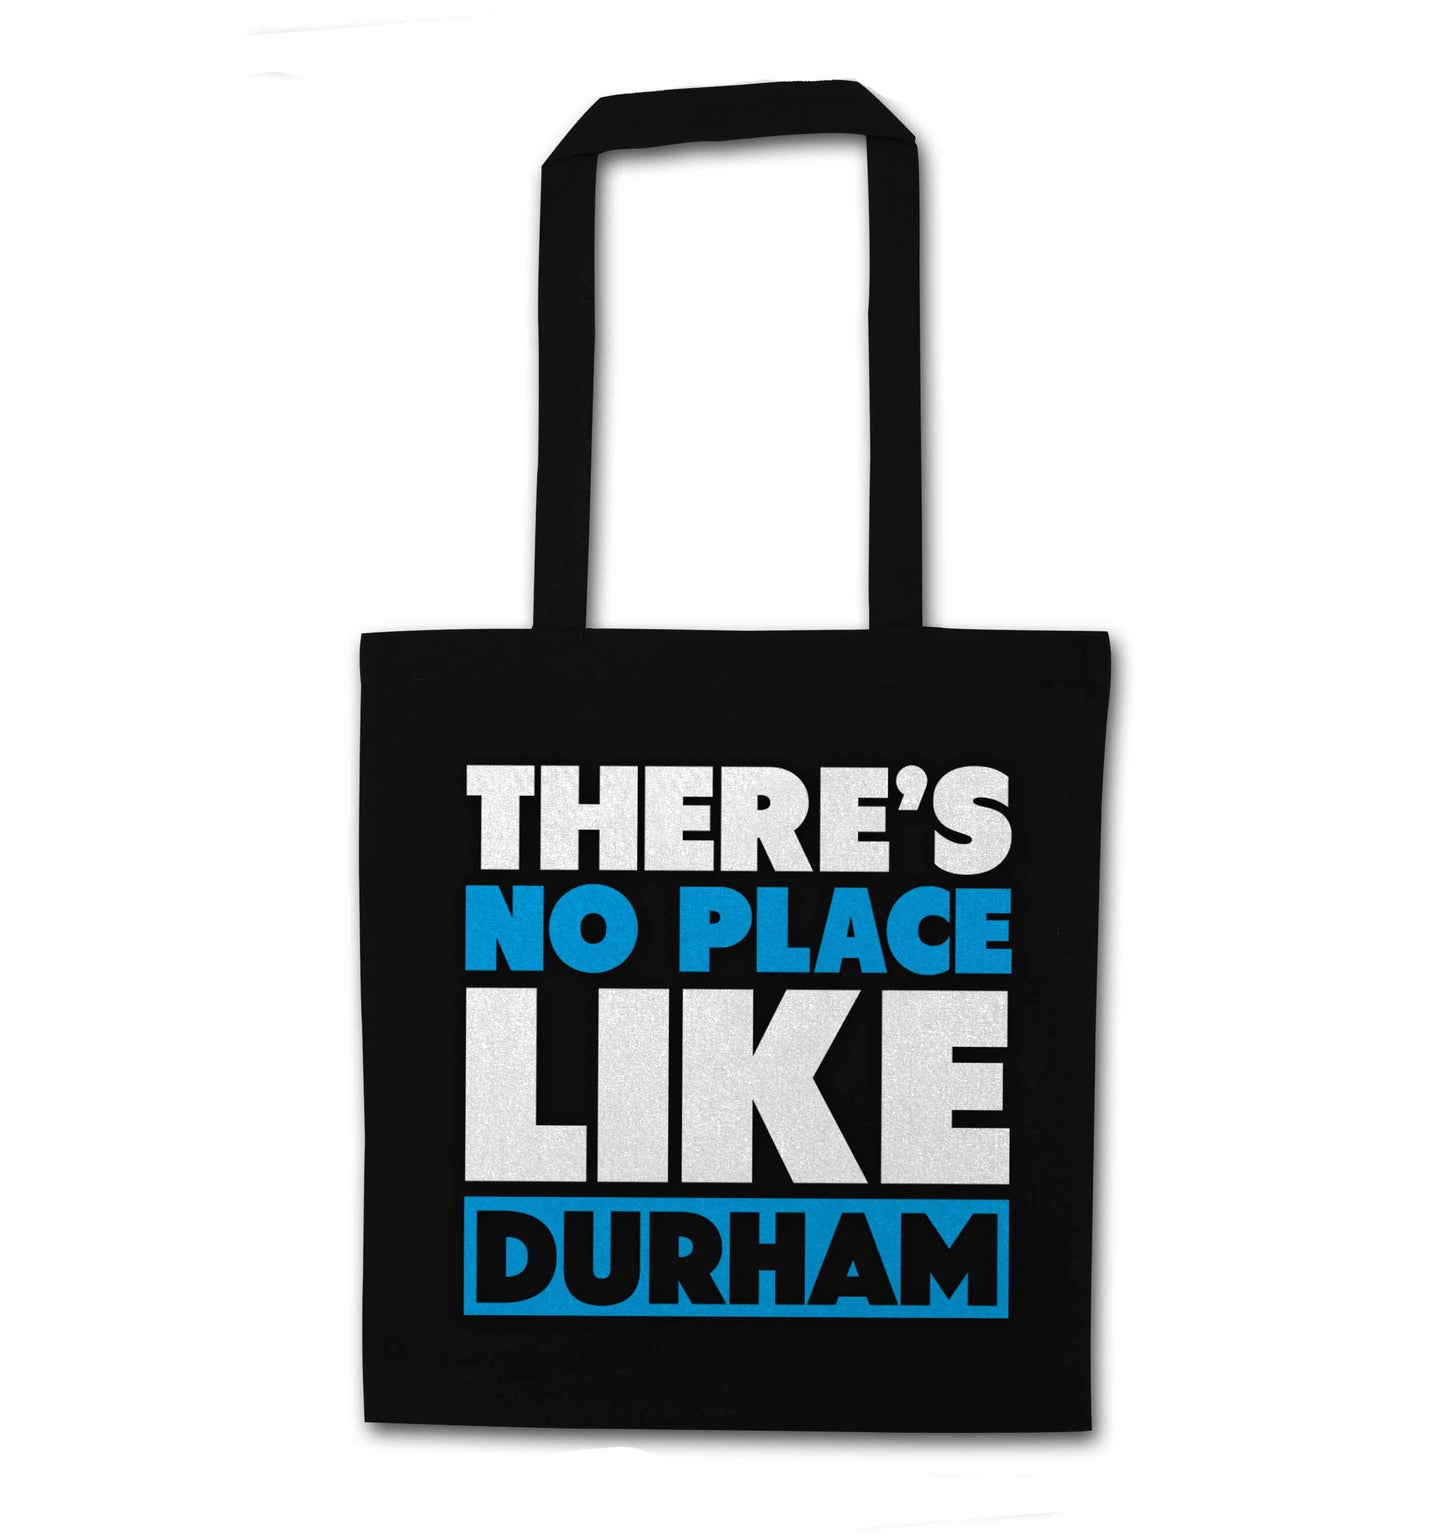 There's no place like Durham black tote bag